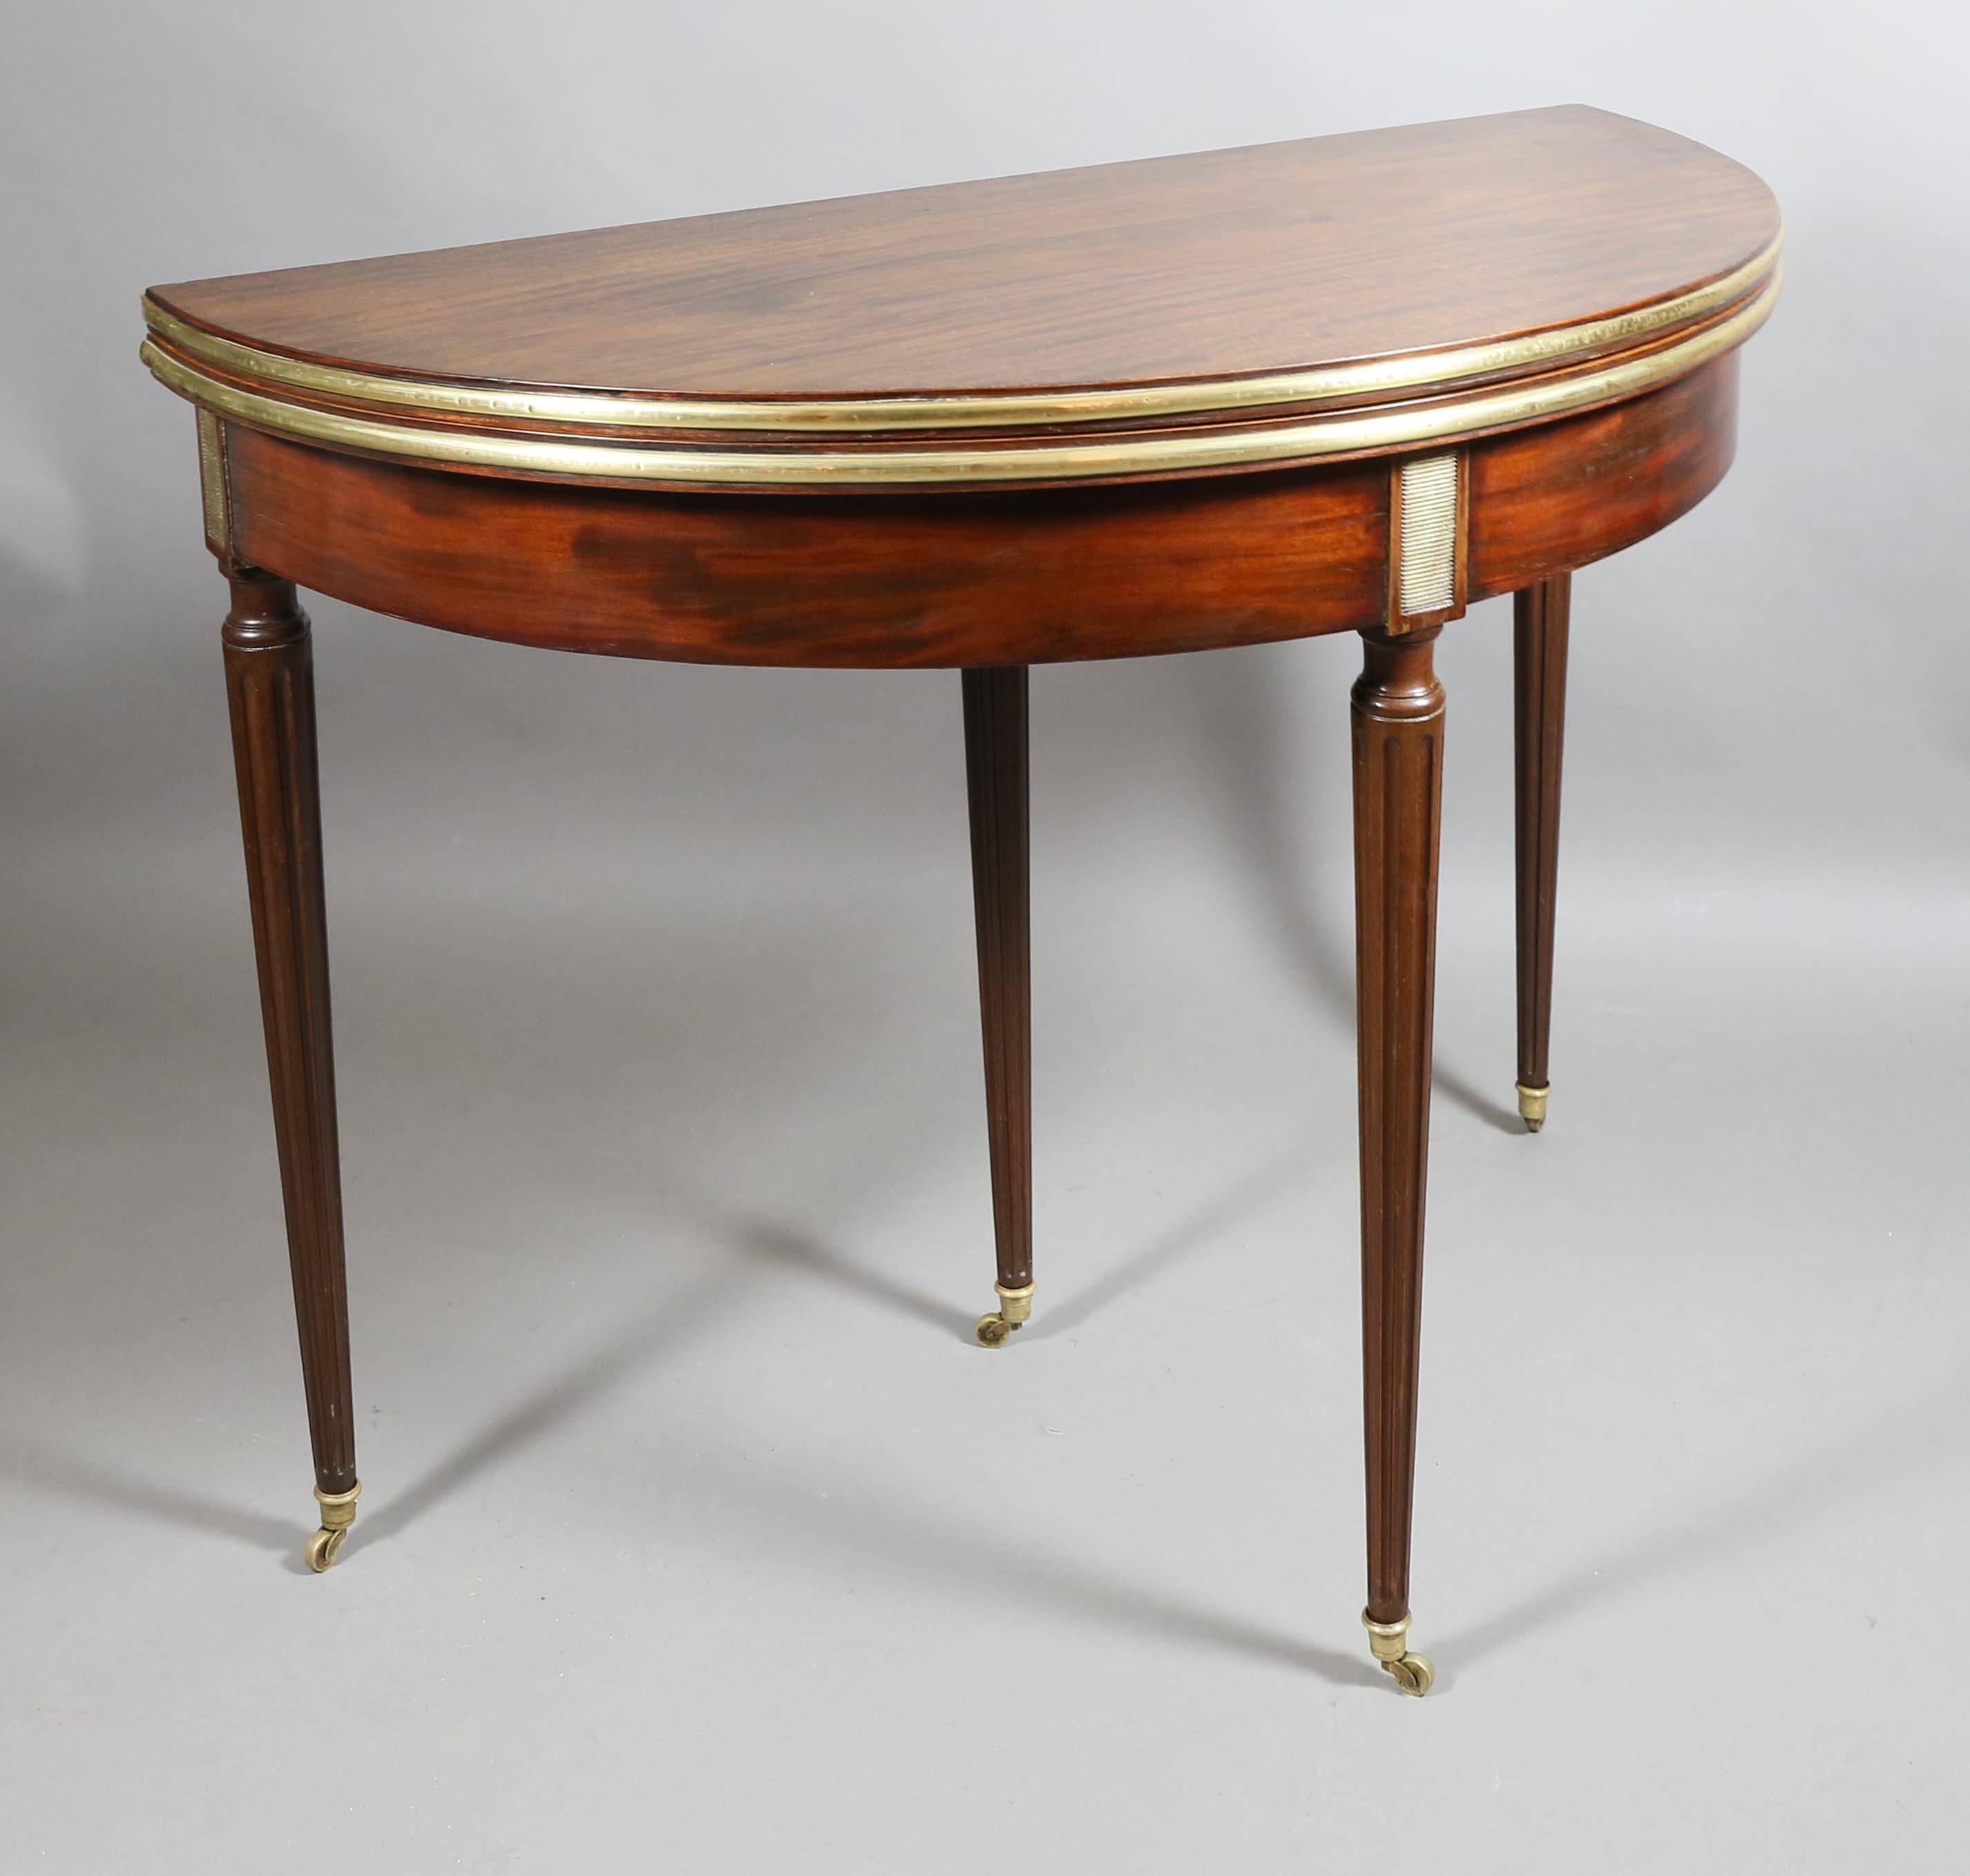 Demilune shape with hinged top opening to a felt lined playing surface over a conforming frieze with circular tapered fluted legs headed by grillwork panels, rear legs pulls out all ending on casters.